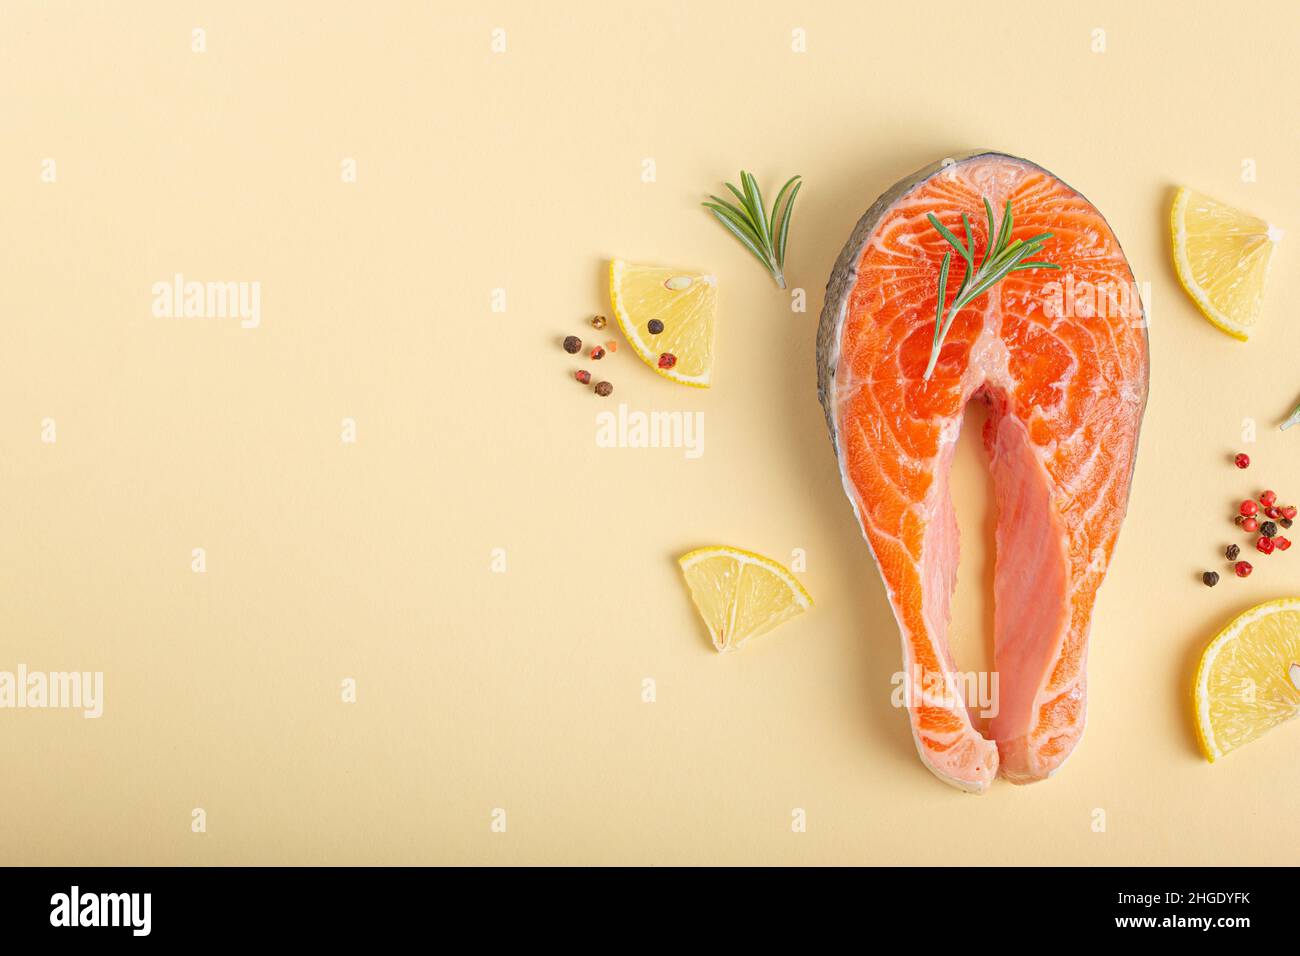 Raw fresh fish salmon steak top view on beige pastel background from above Stock Photo